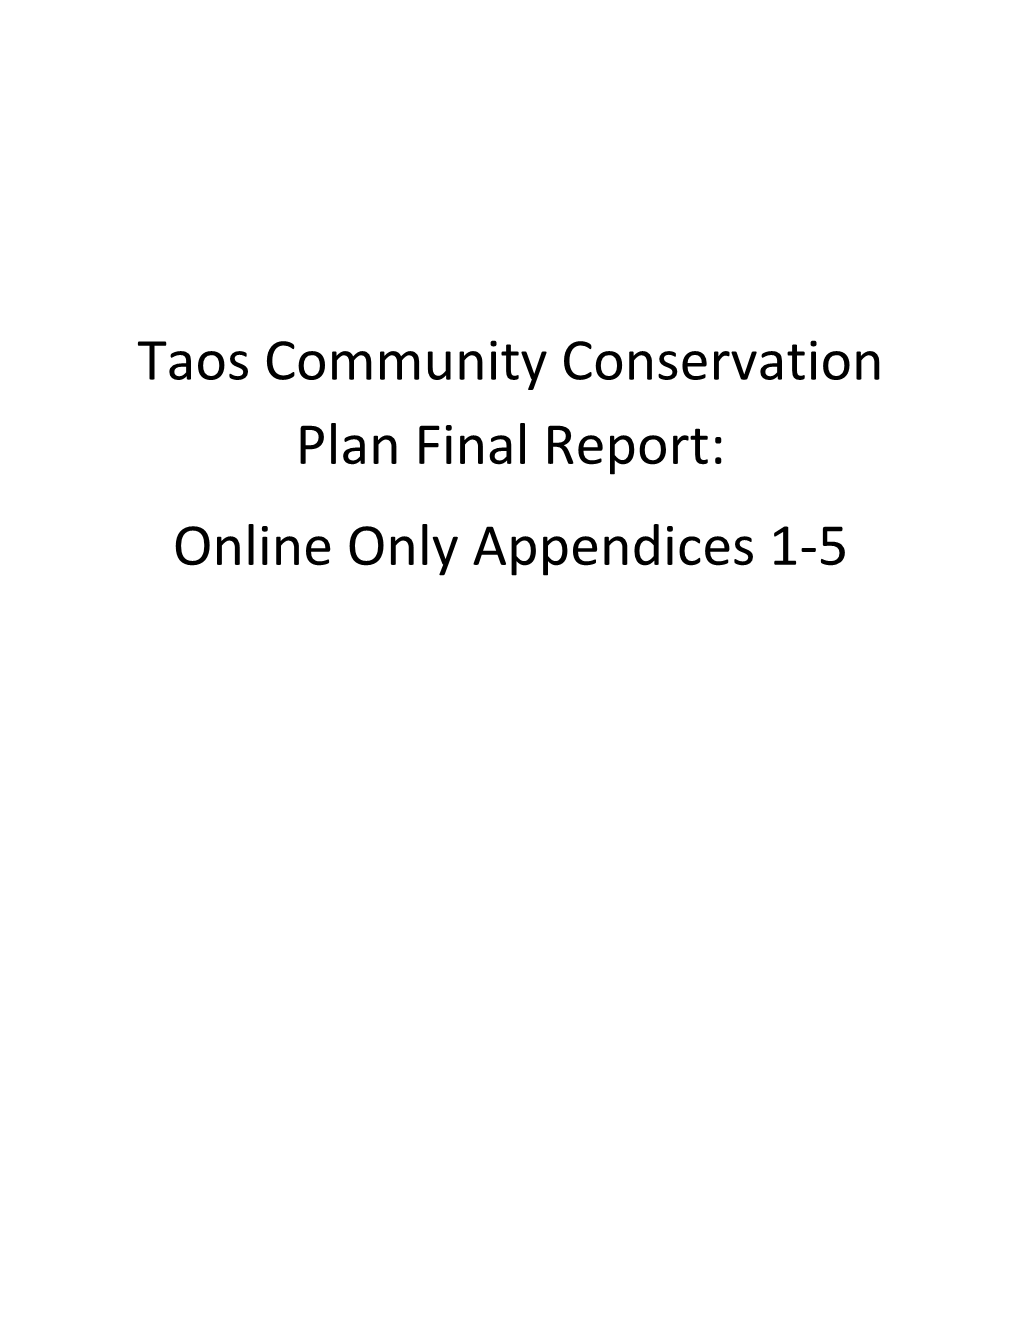 Taos Community Conservation Plan Final Report: Online Only Appendices 1-5